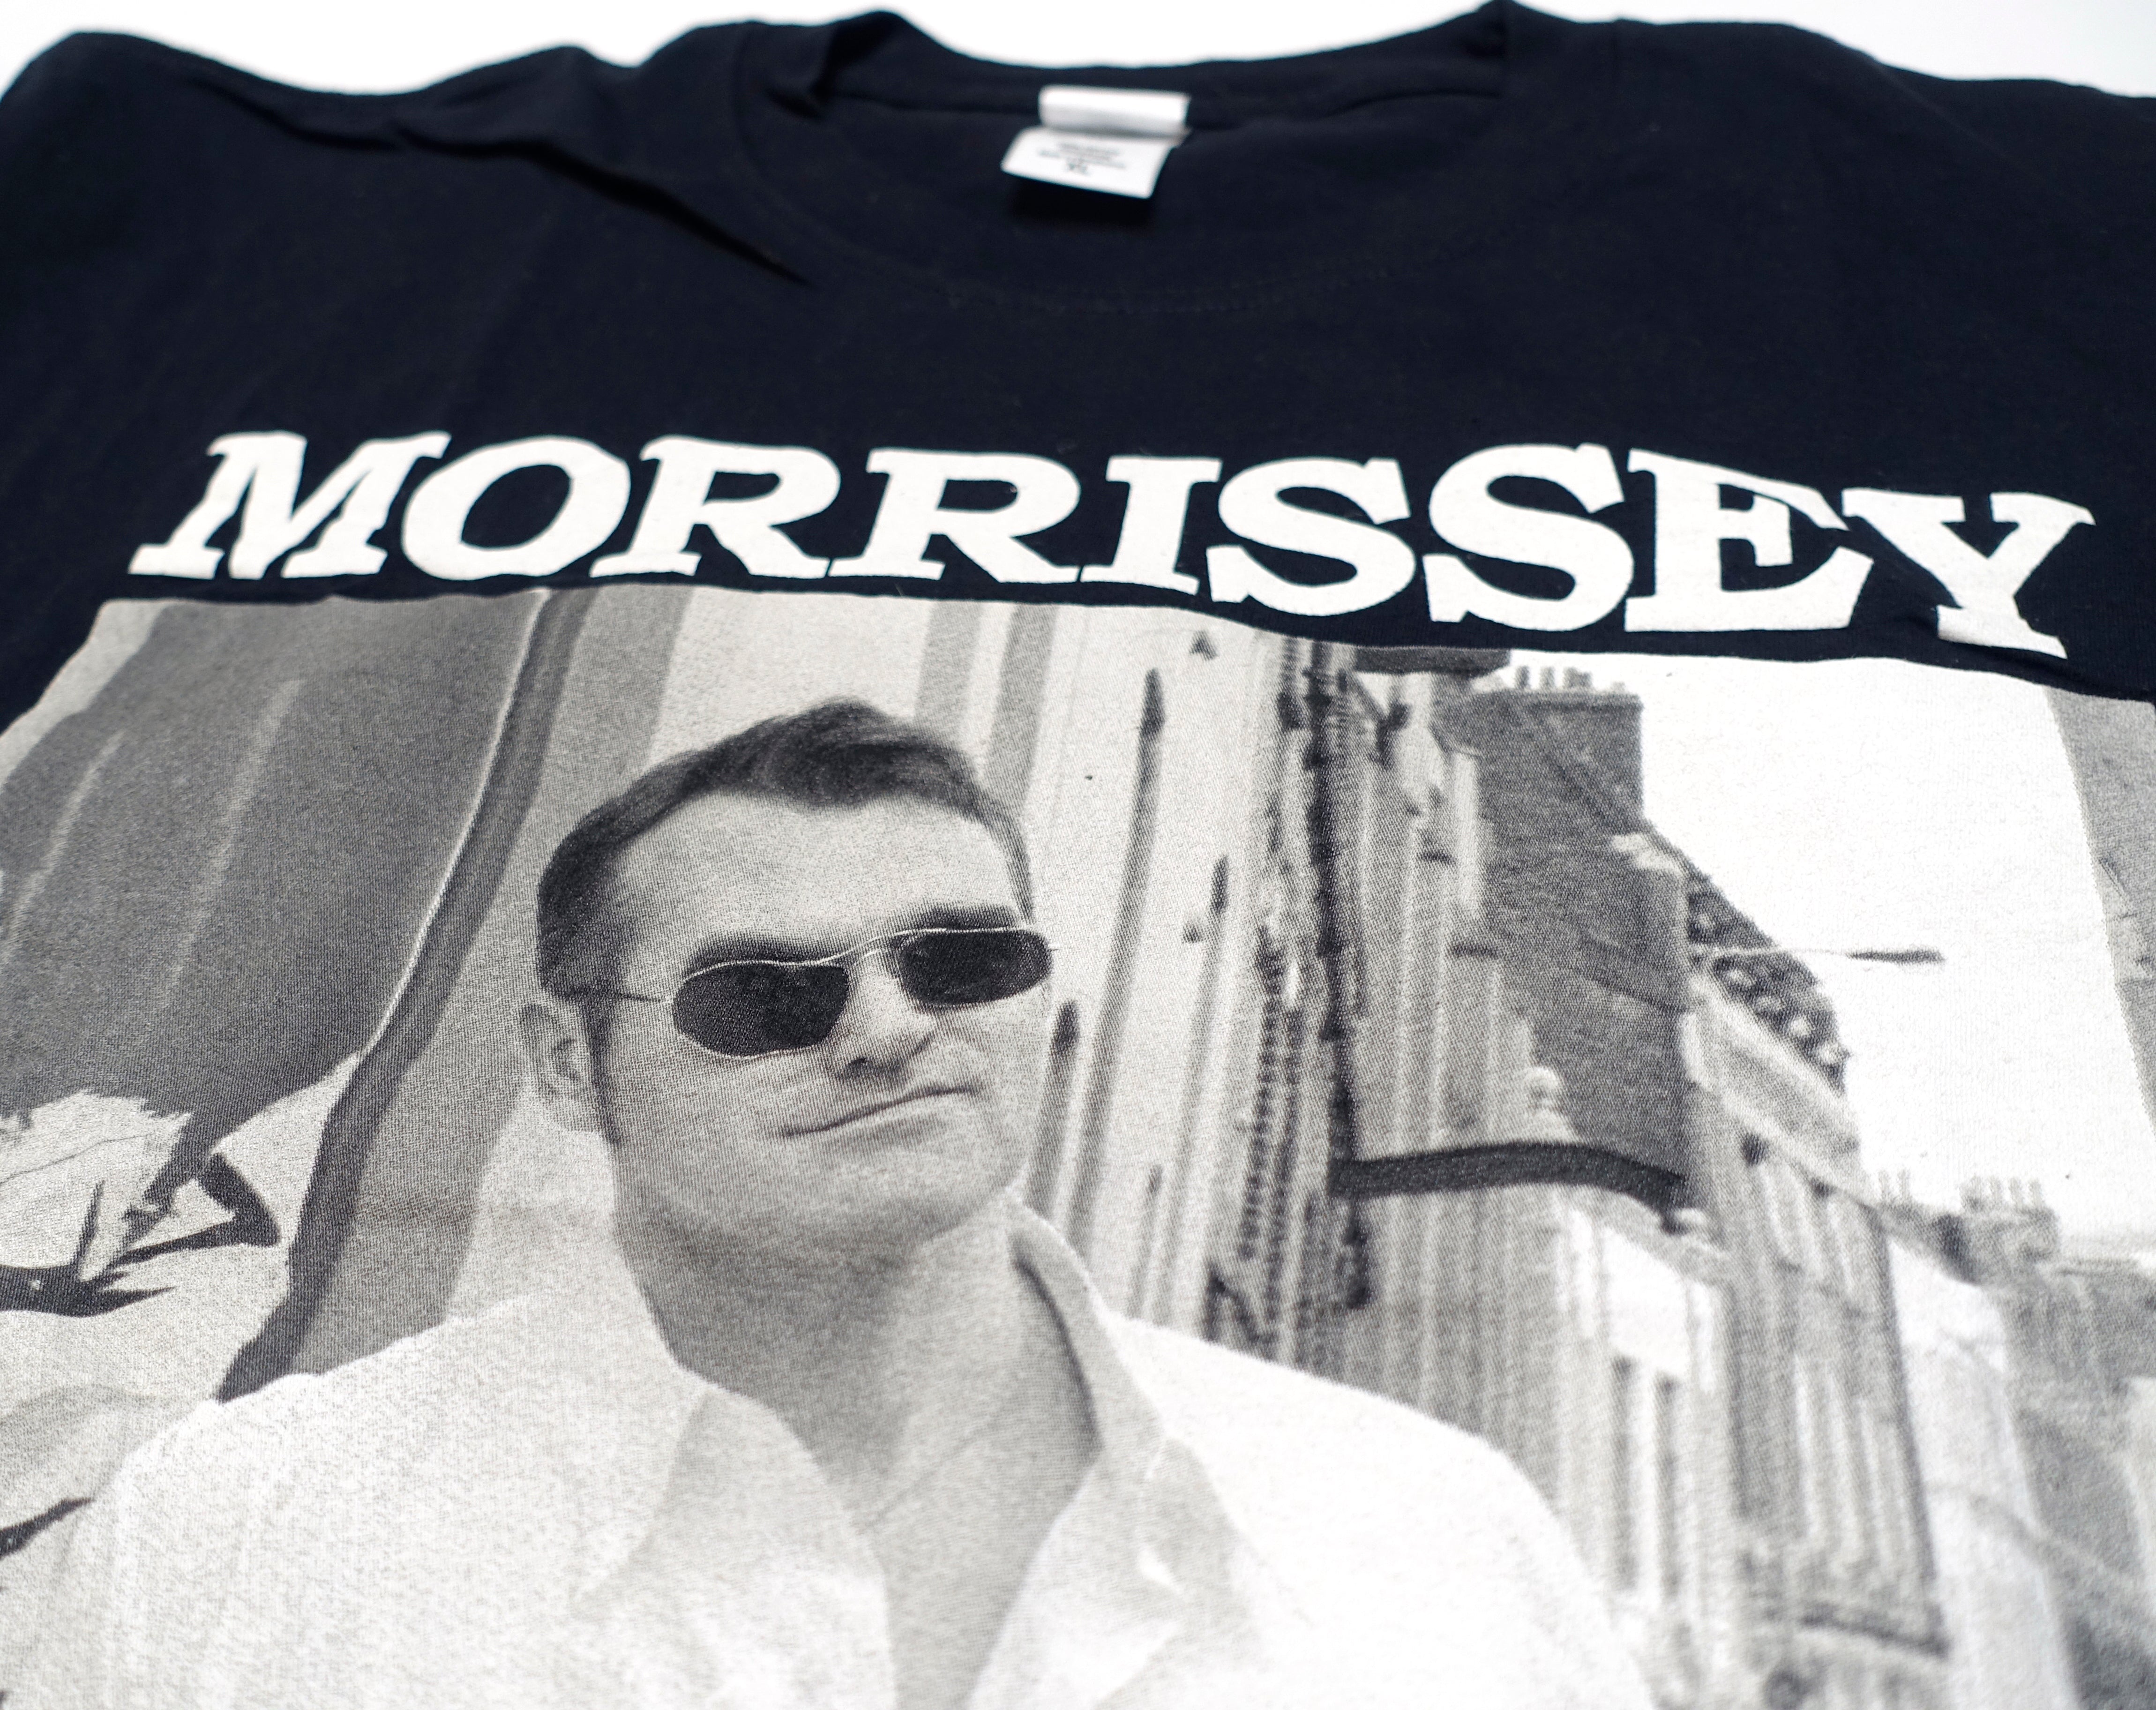 Morrissey - Maladjusted Redux Cover Tour Shirt Size XL